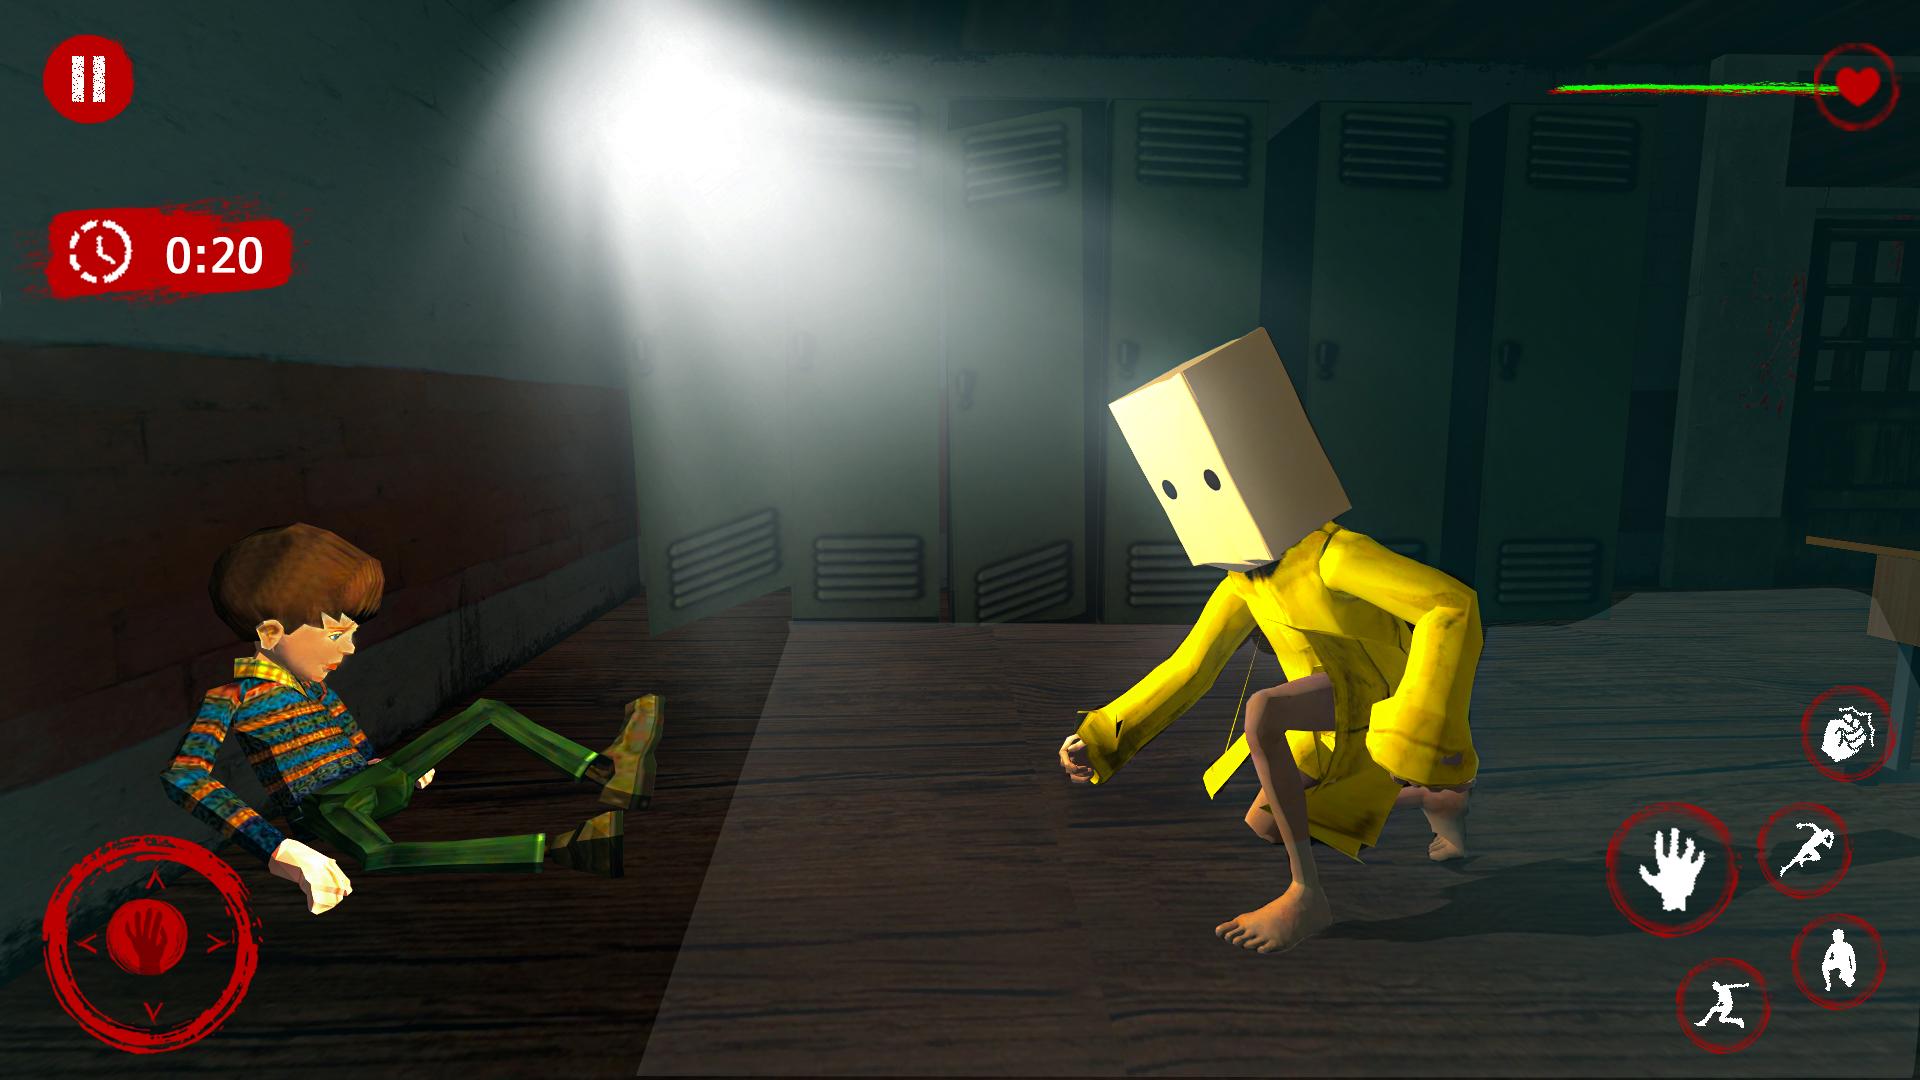 Little Scary Nightmares 2 - Haunted House Escape 0.1 Screenshot 1